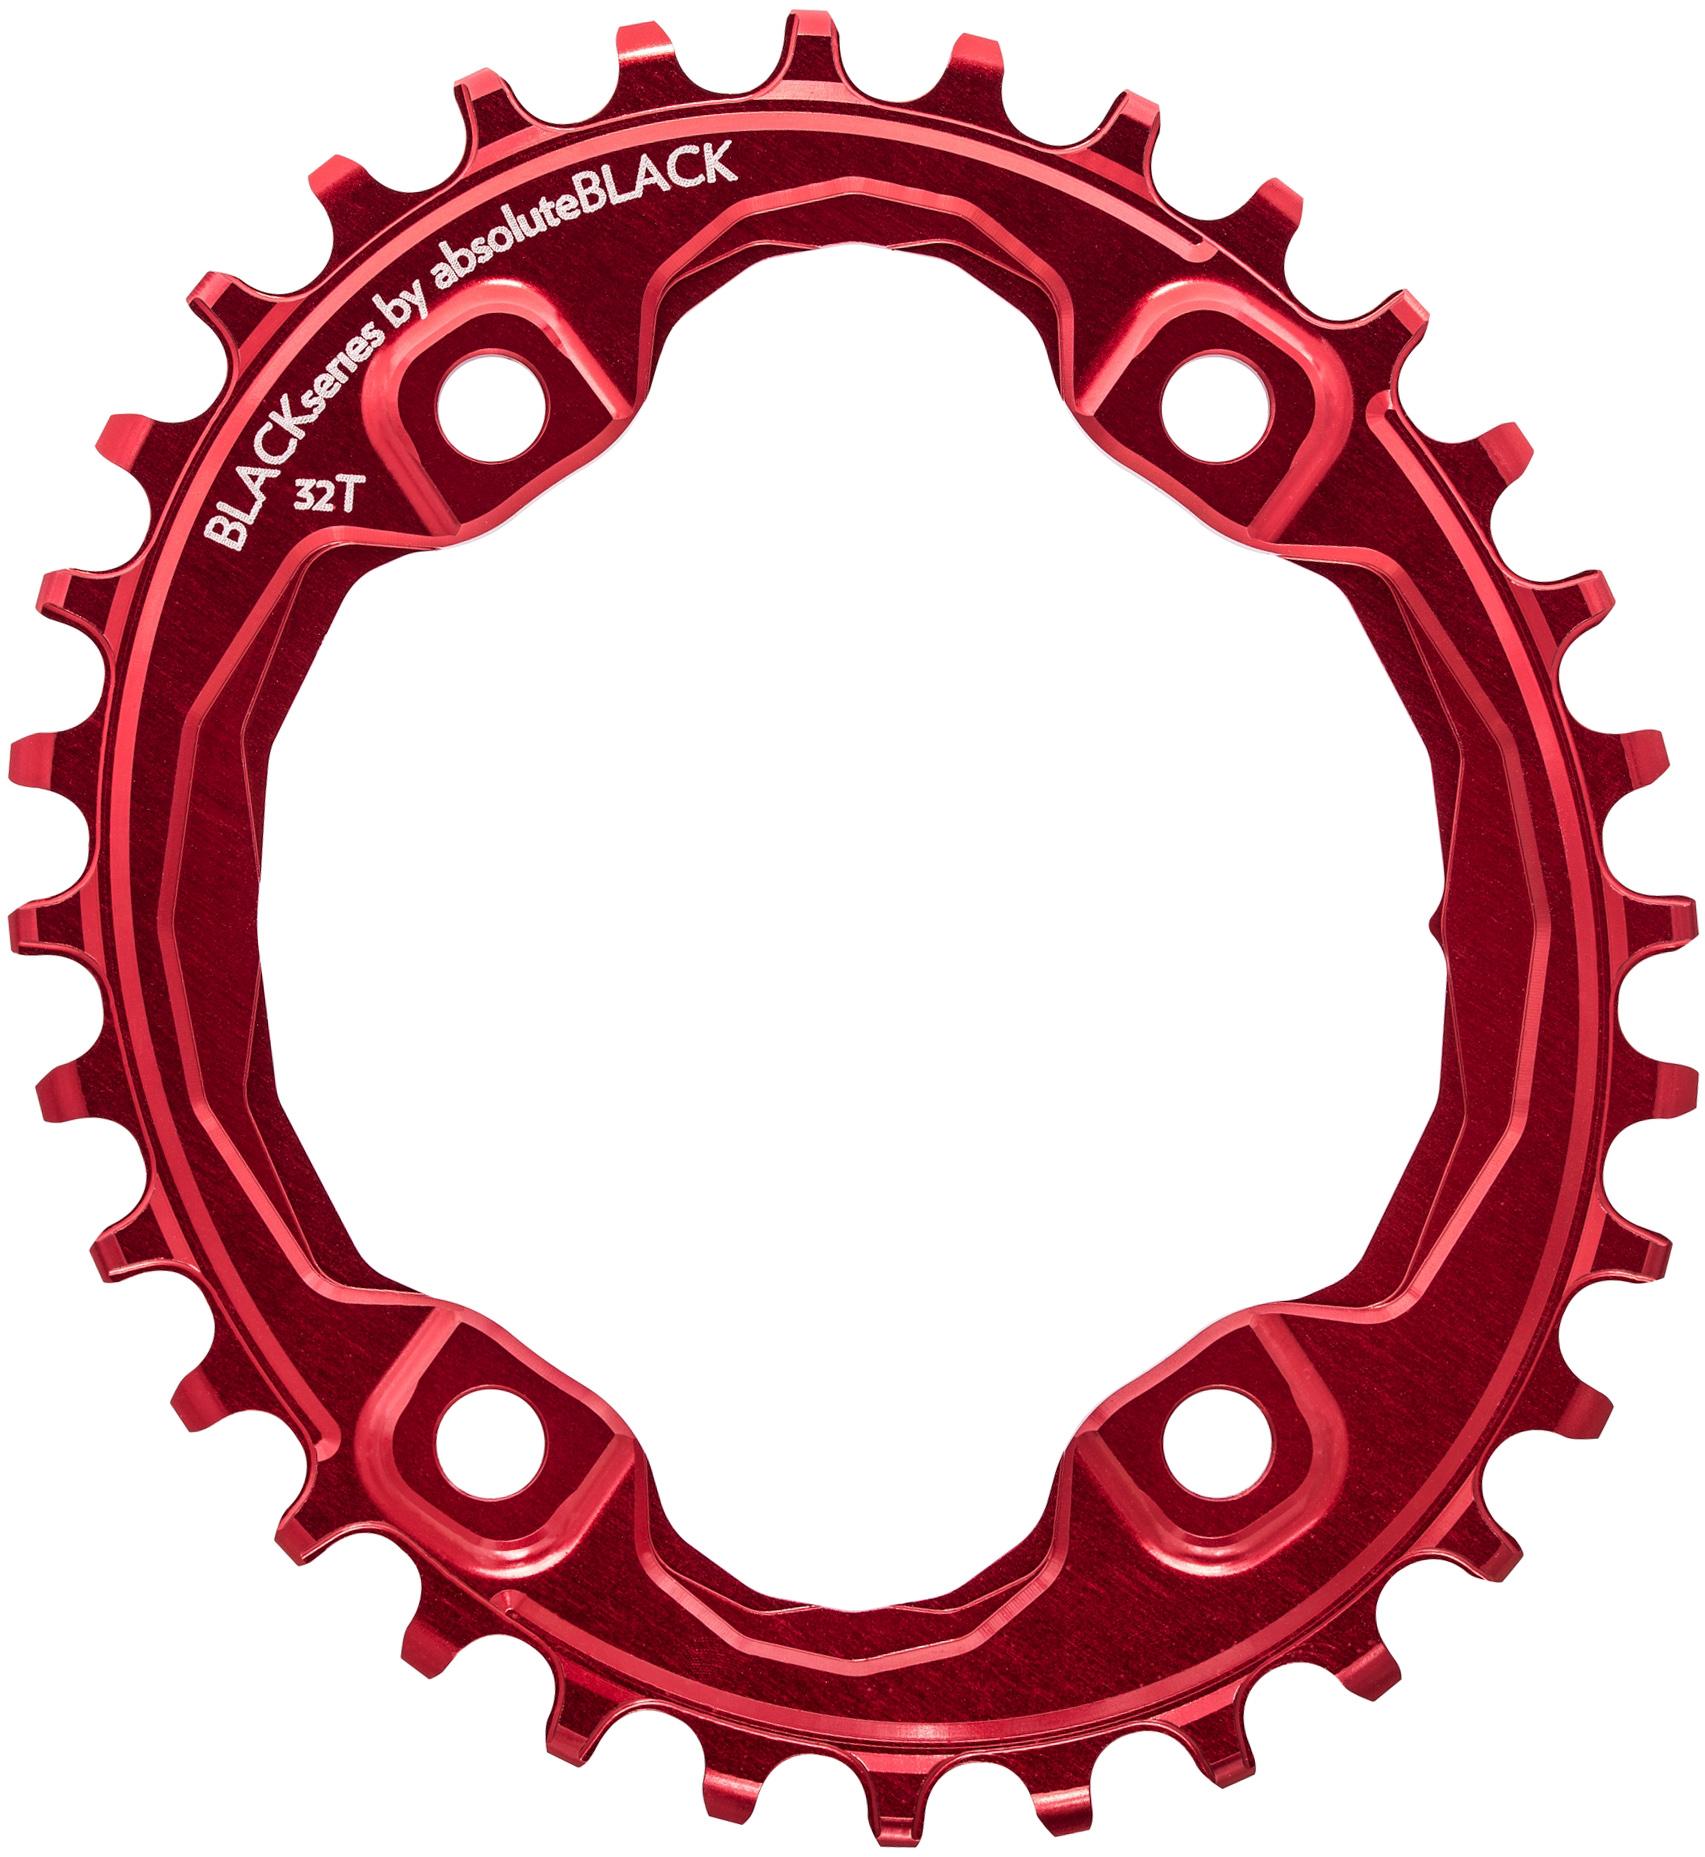 Black By Absoluteblack Narrow Wide Oval Xt M8000 Chainring  Red